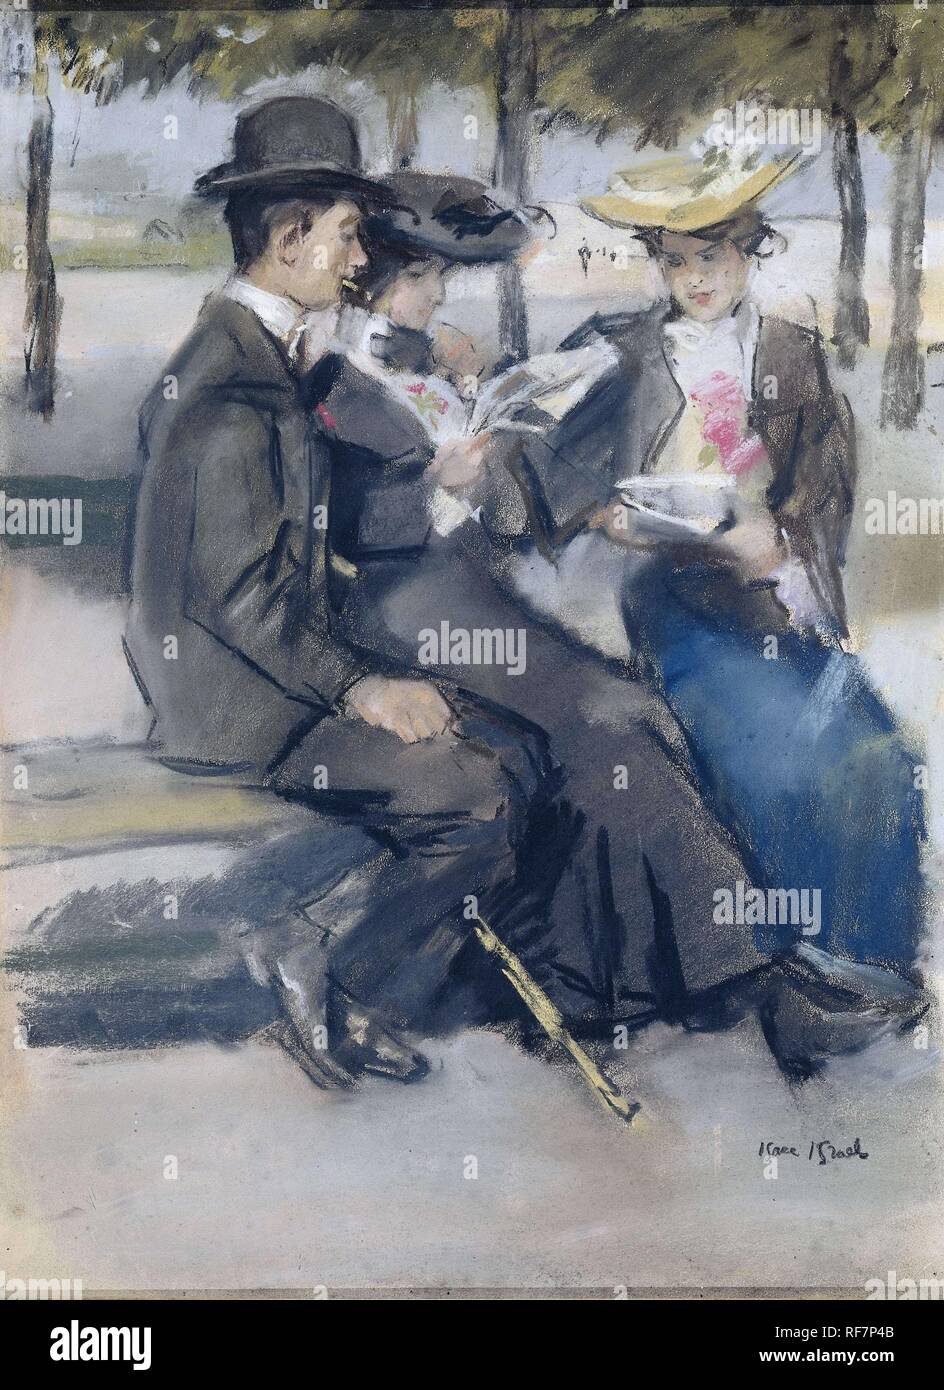 In the Bois de Boulogne near Paris. Draughtsman: Isaac Israels (mentioned on object). Dating: 1875 - 1919. Place: Paris. Measurements: h 495 mm × w 355 mm. Museum: Rijksmuseum, Amsterdam. Stock Photo